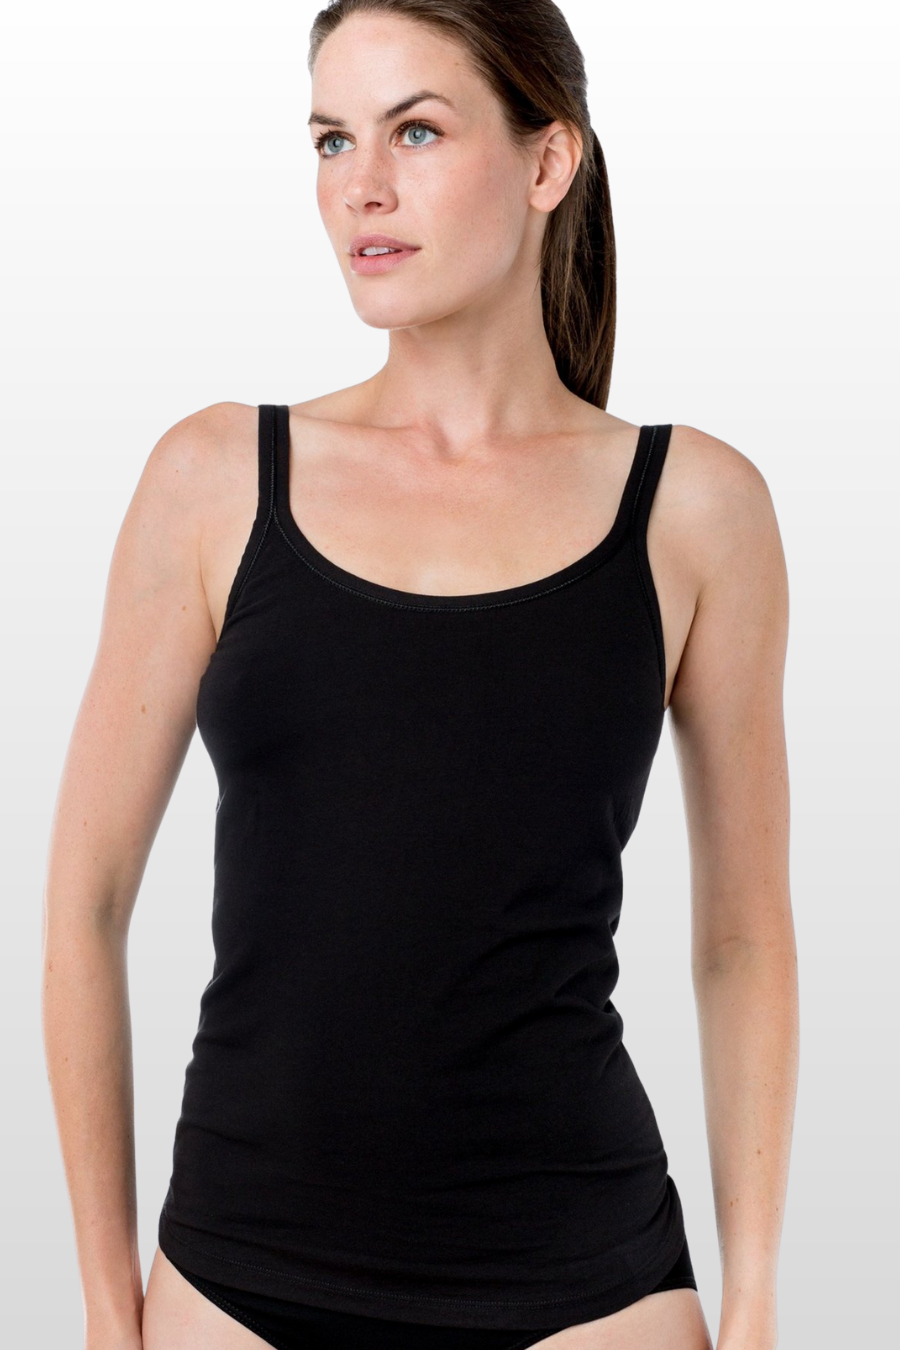 WOMEN'S CLASSIC FIT CAMISOLE WITH BUILT-IN SHELF BRA